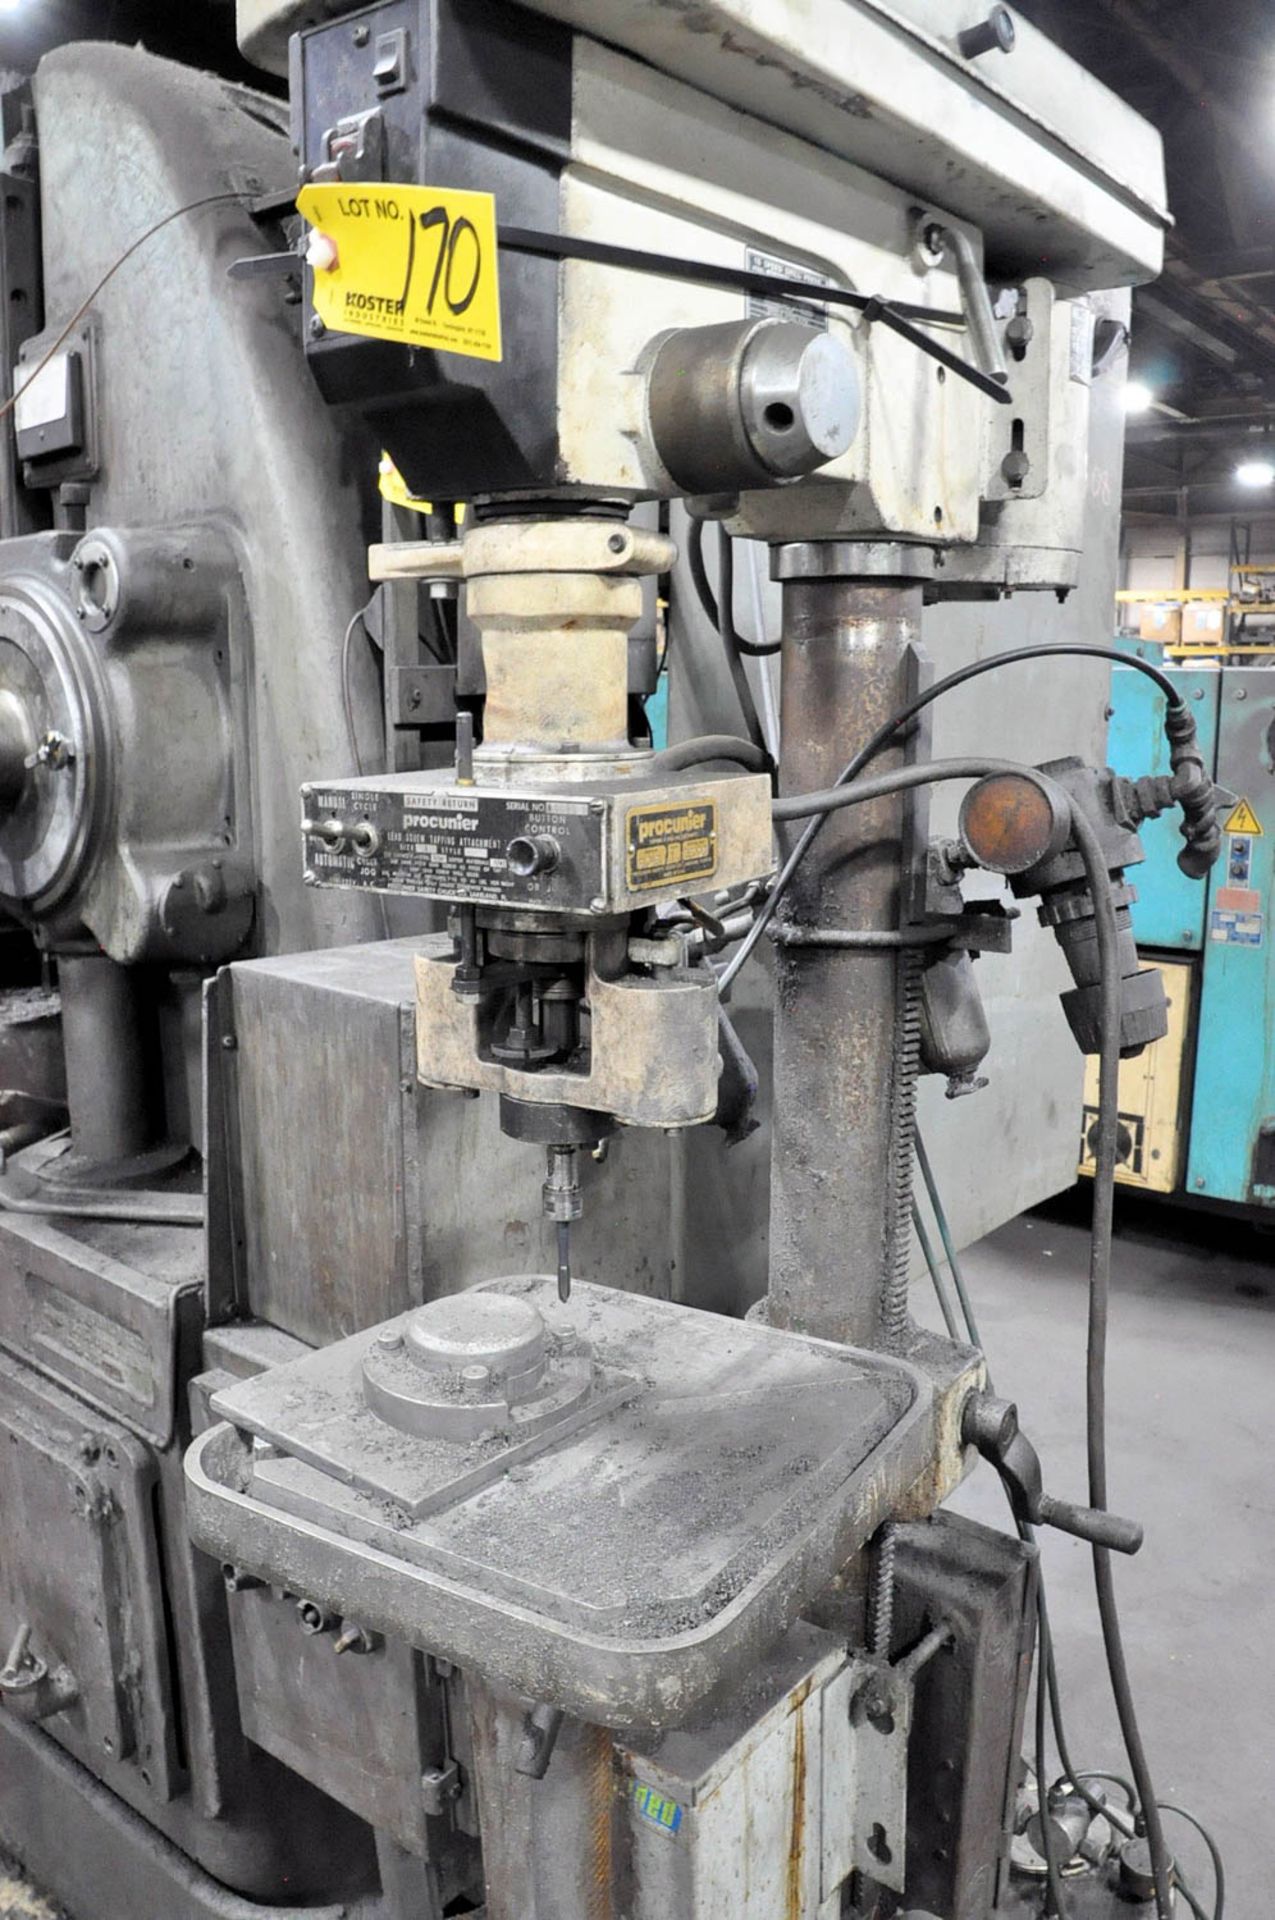 PROCUNIER MDL. 793.12888851, 17" FLOOR STANDING SINGLE SPINDLE TAPPING MACHINE, S/N: 271732 ( - Image 2 of 2